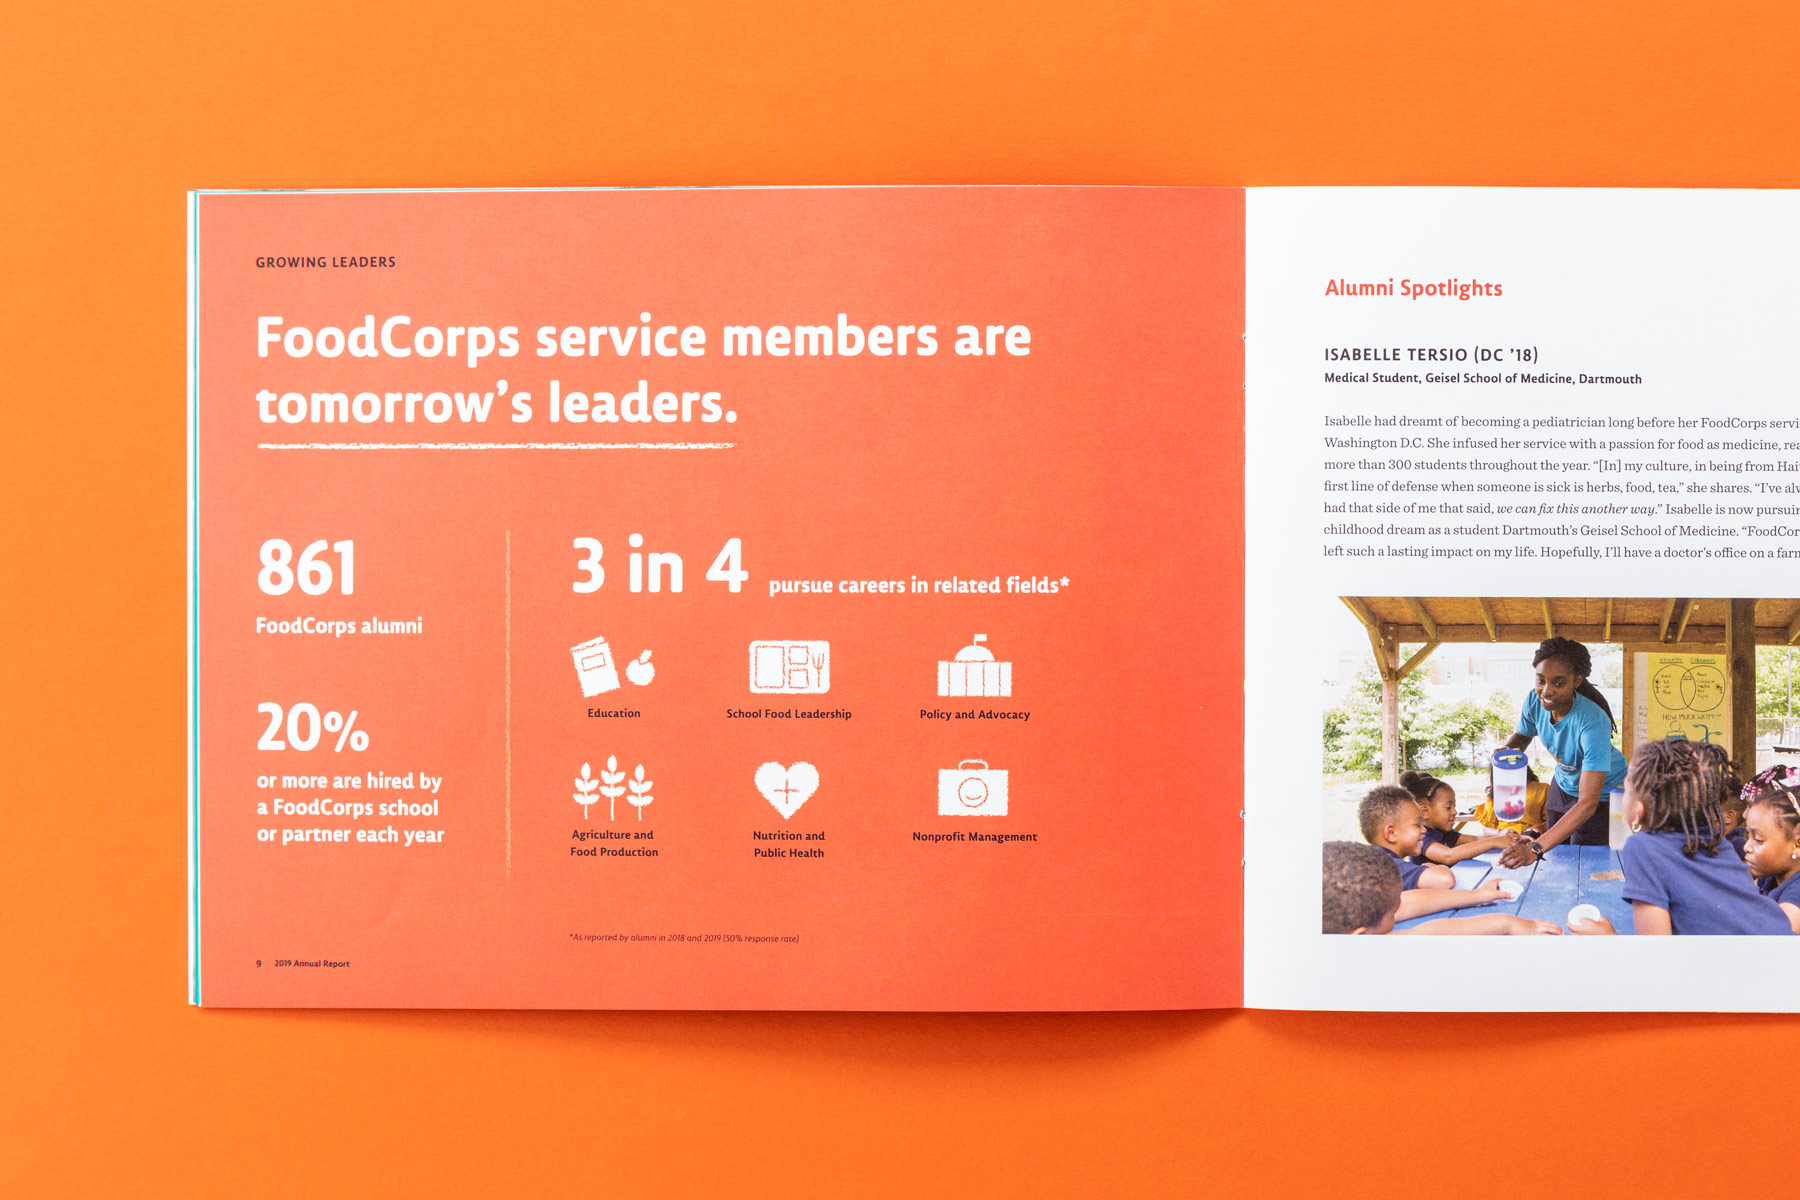 Infographic showing that FoodCorps service members are tomorrow's leaders